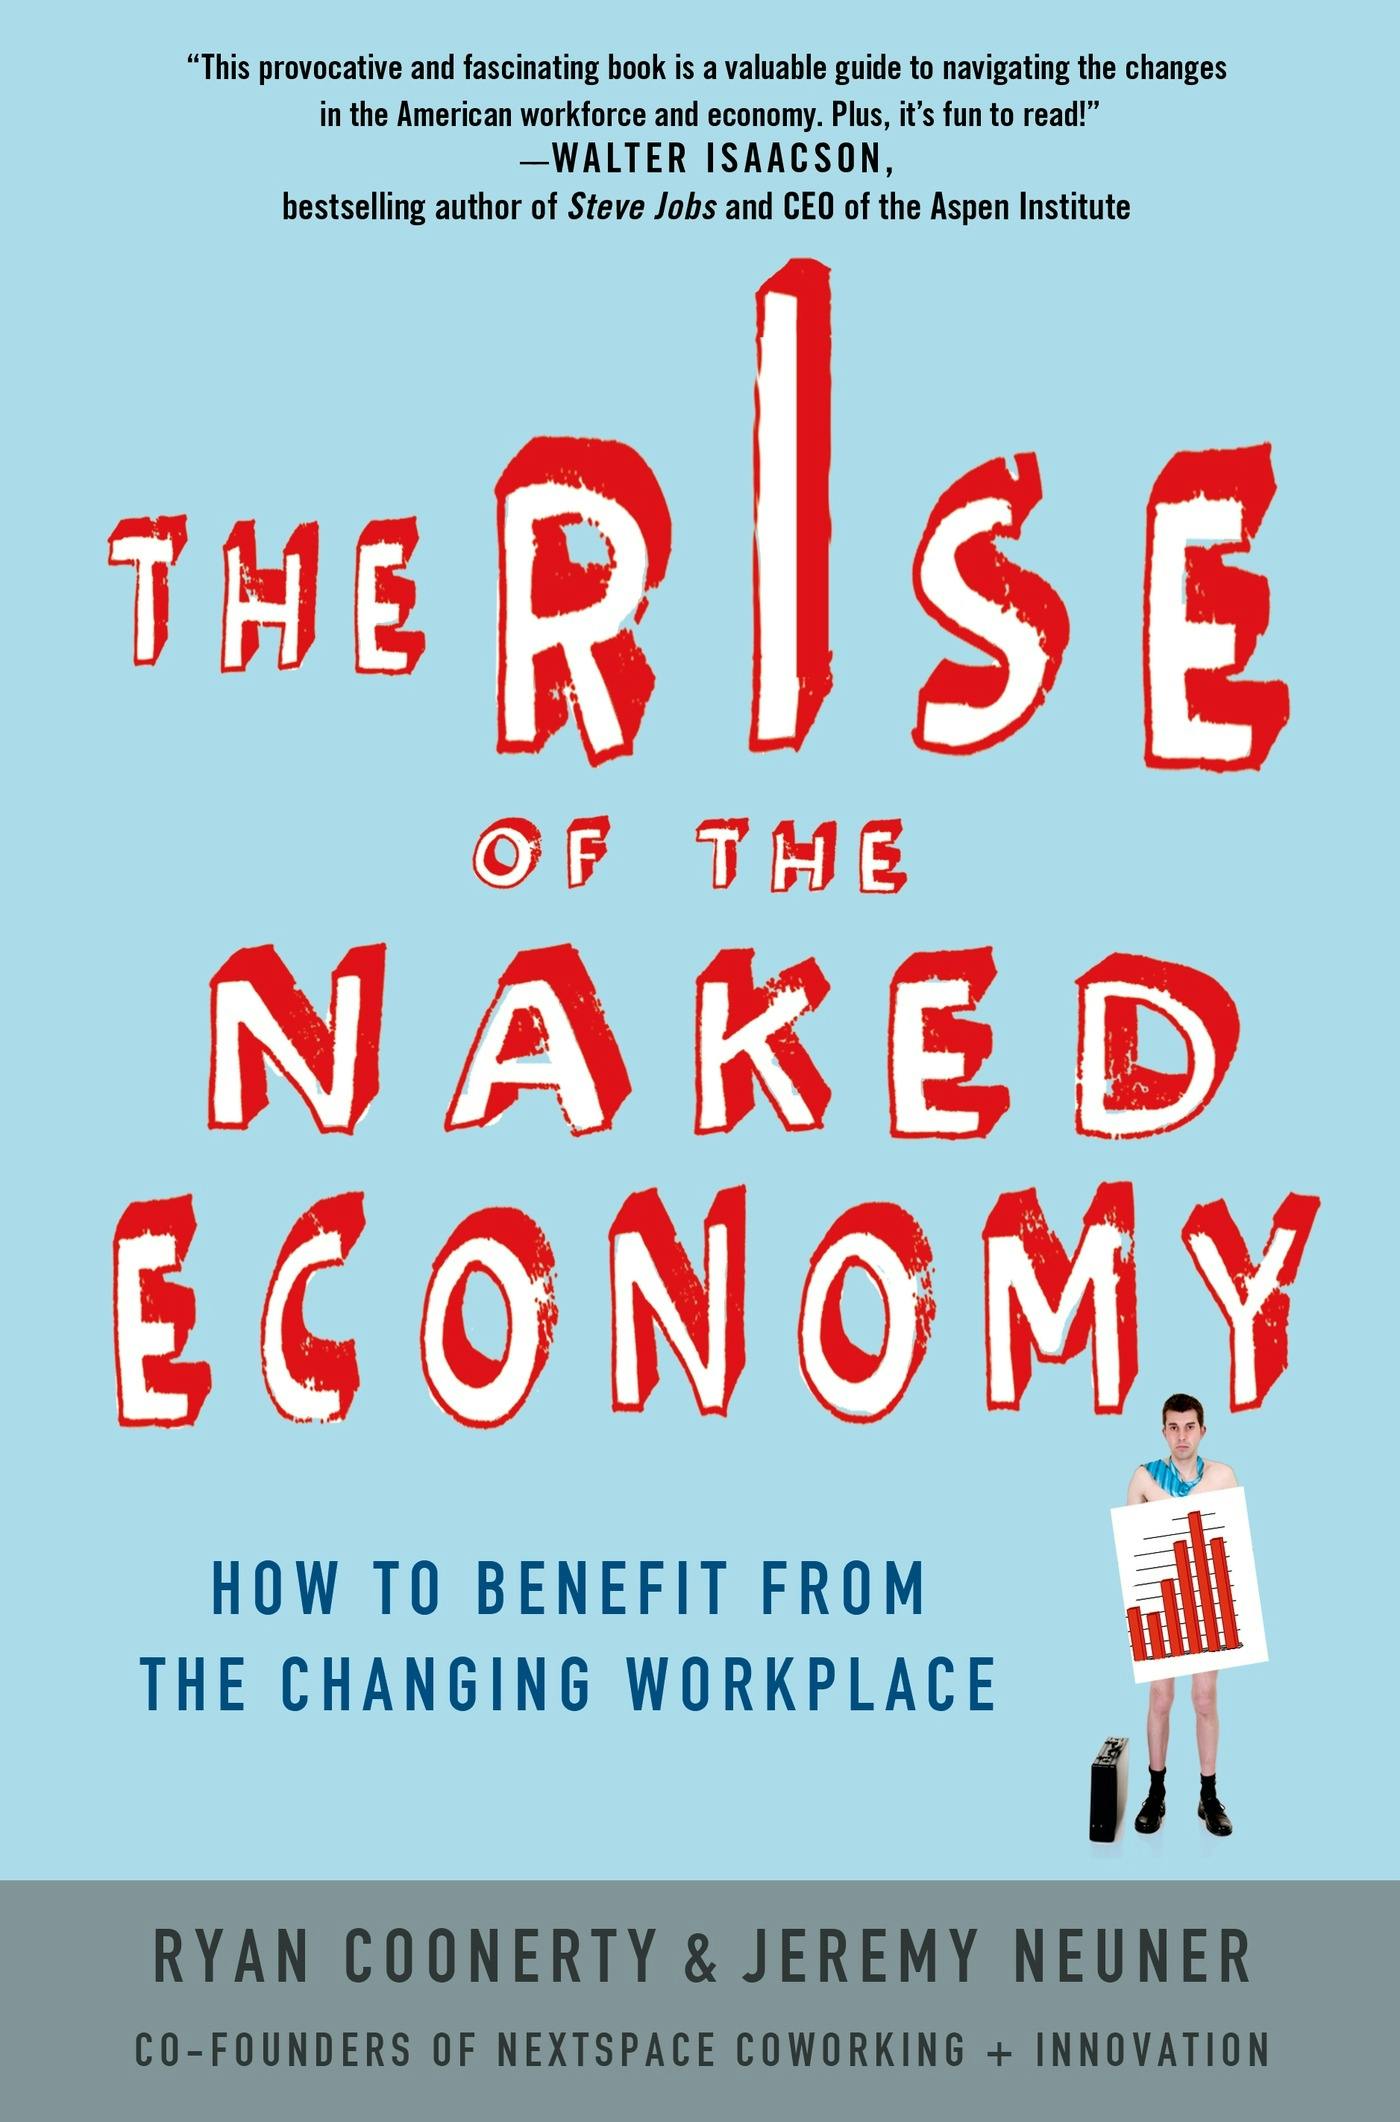 Describes for The Rise of the Naked Economy by authors